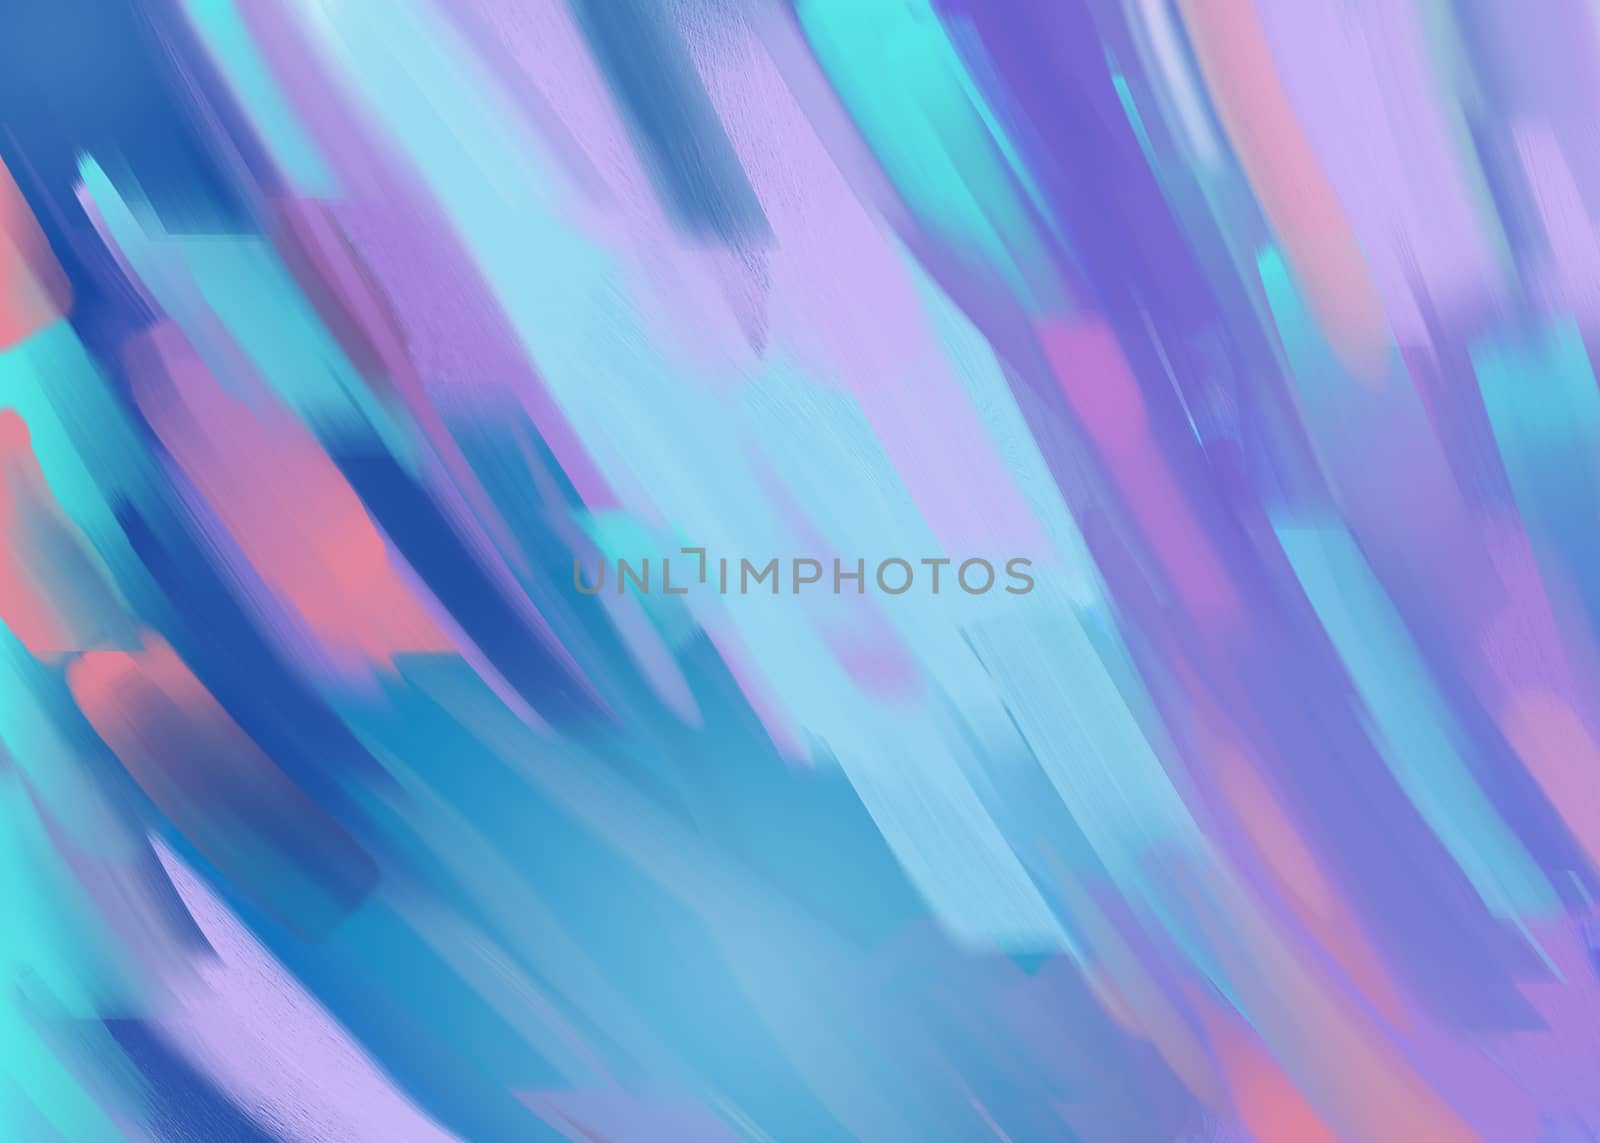 Digital Painting Abstract Textured Colorful Background